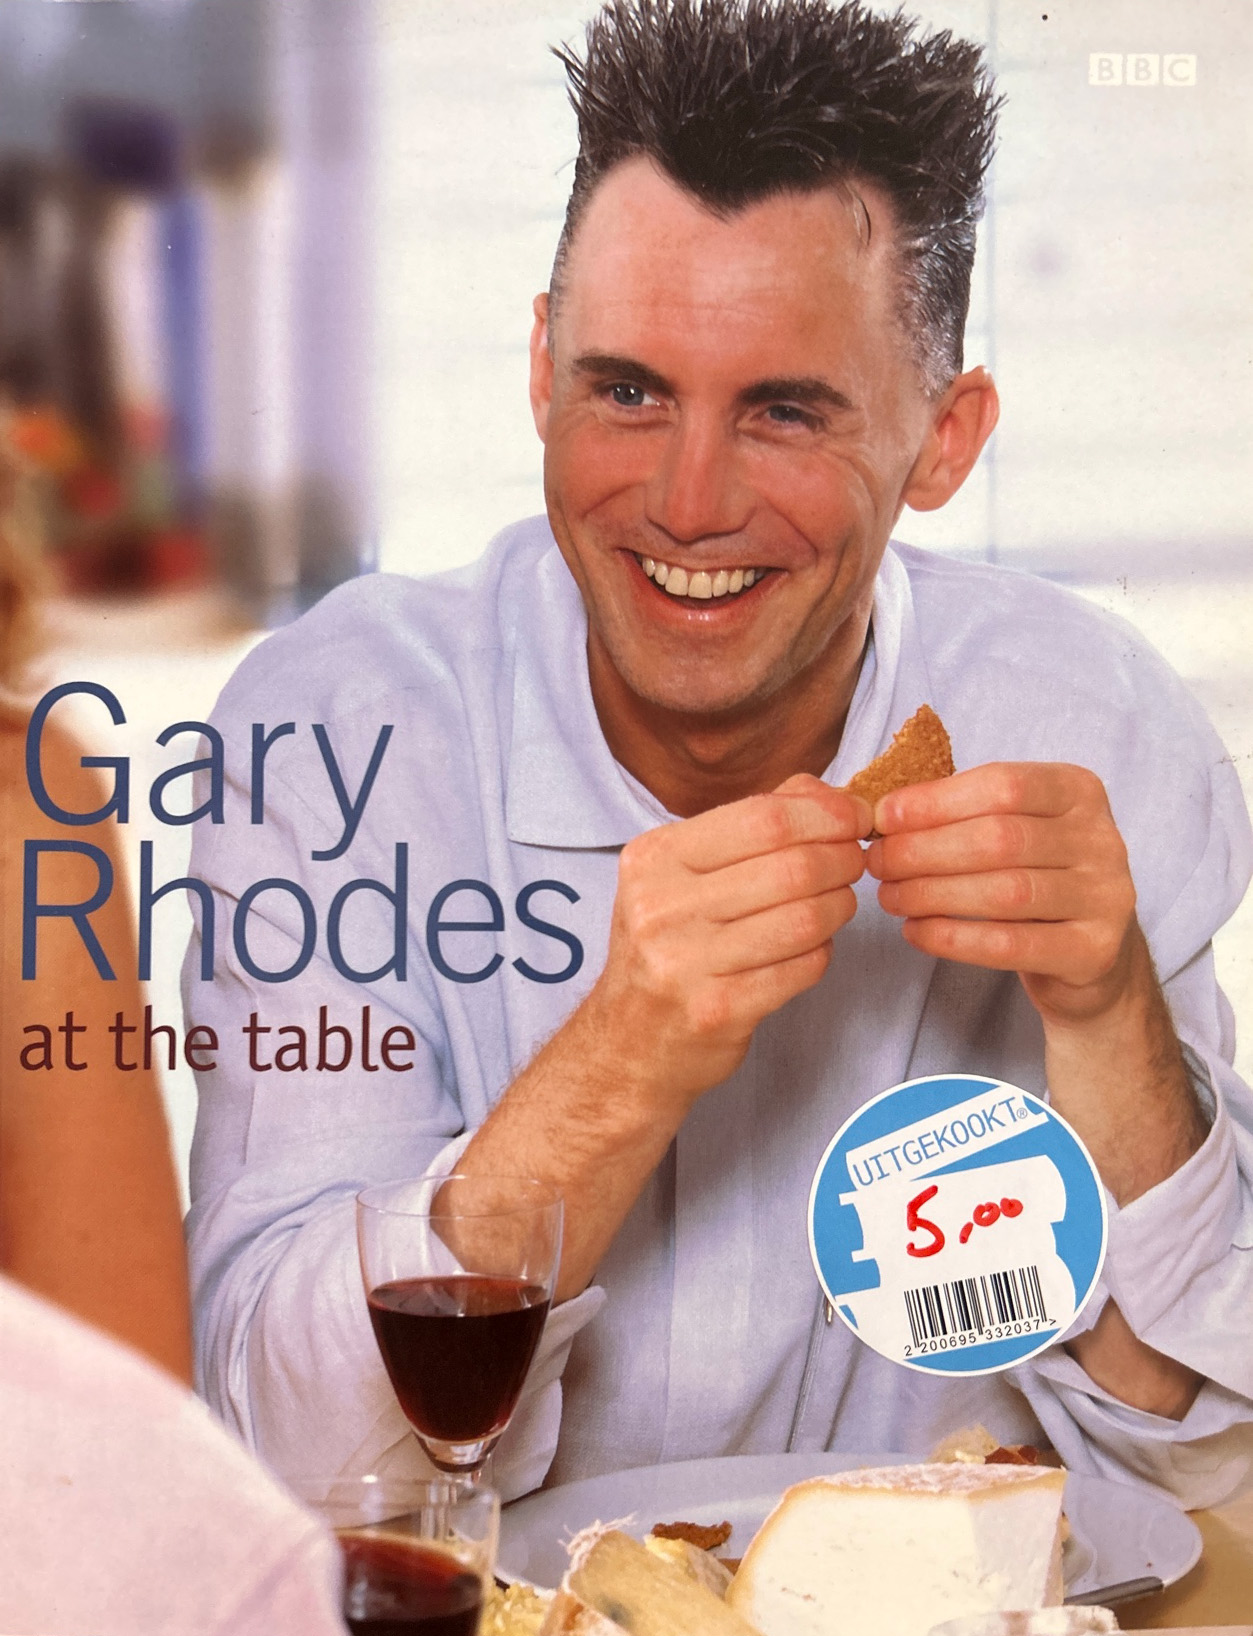 At the table – Gary Rhodes